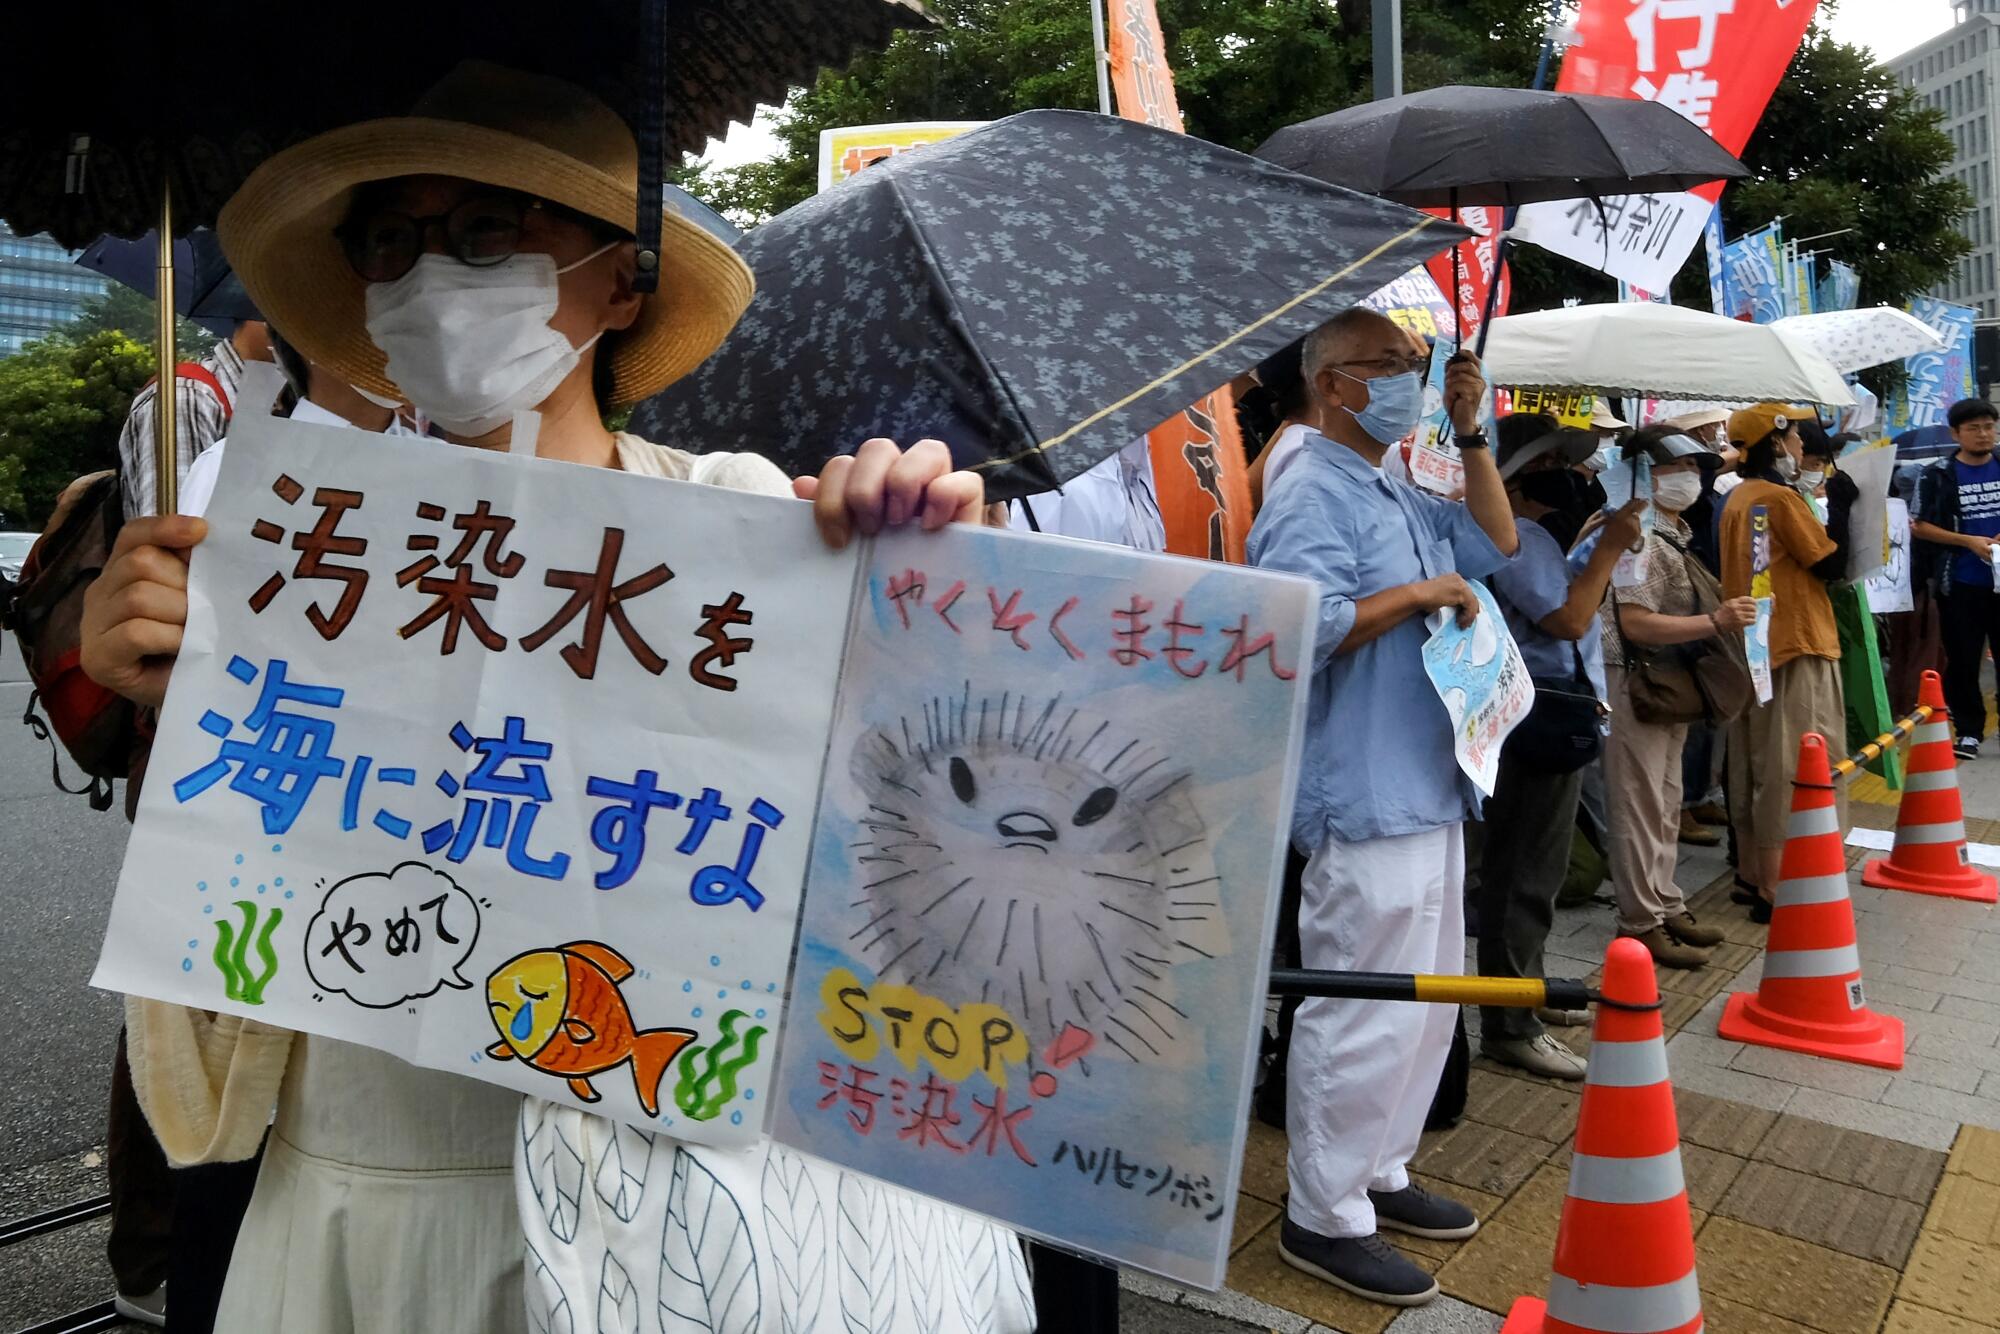 A protester holds signs with a weeping fish and a pufferfish saying "Stop!"